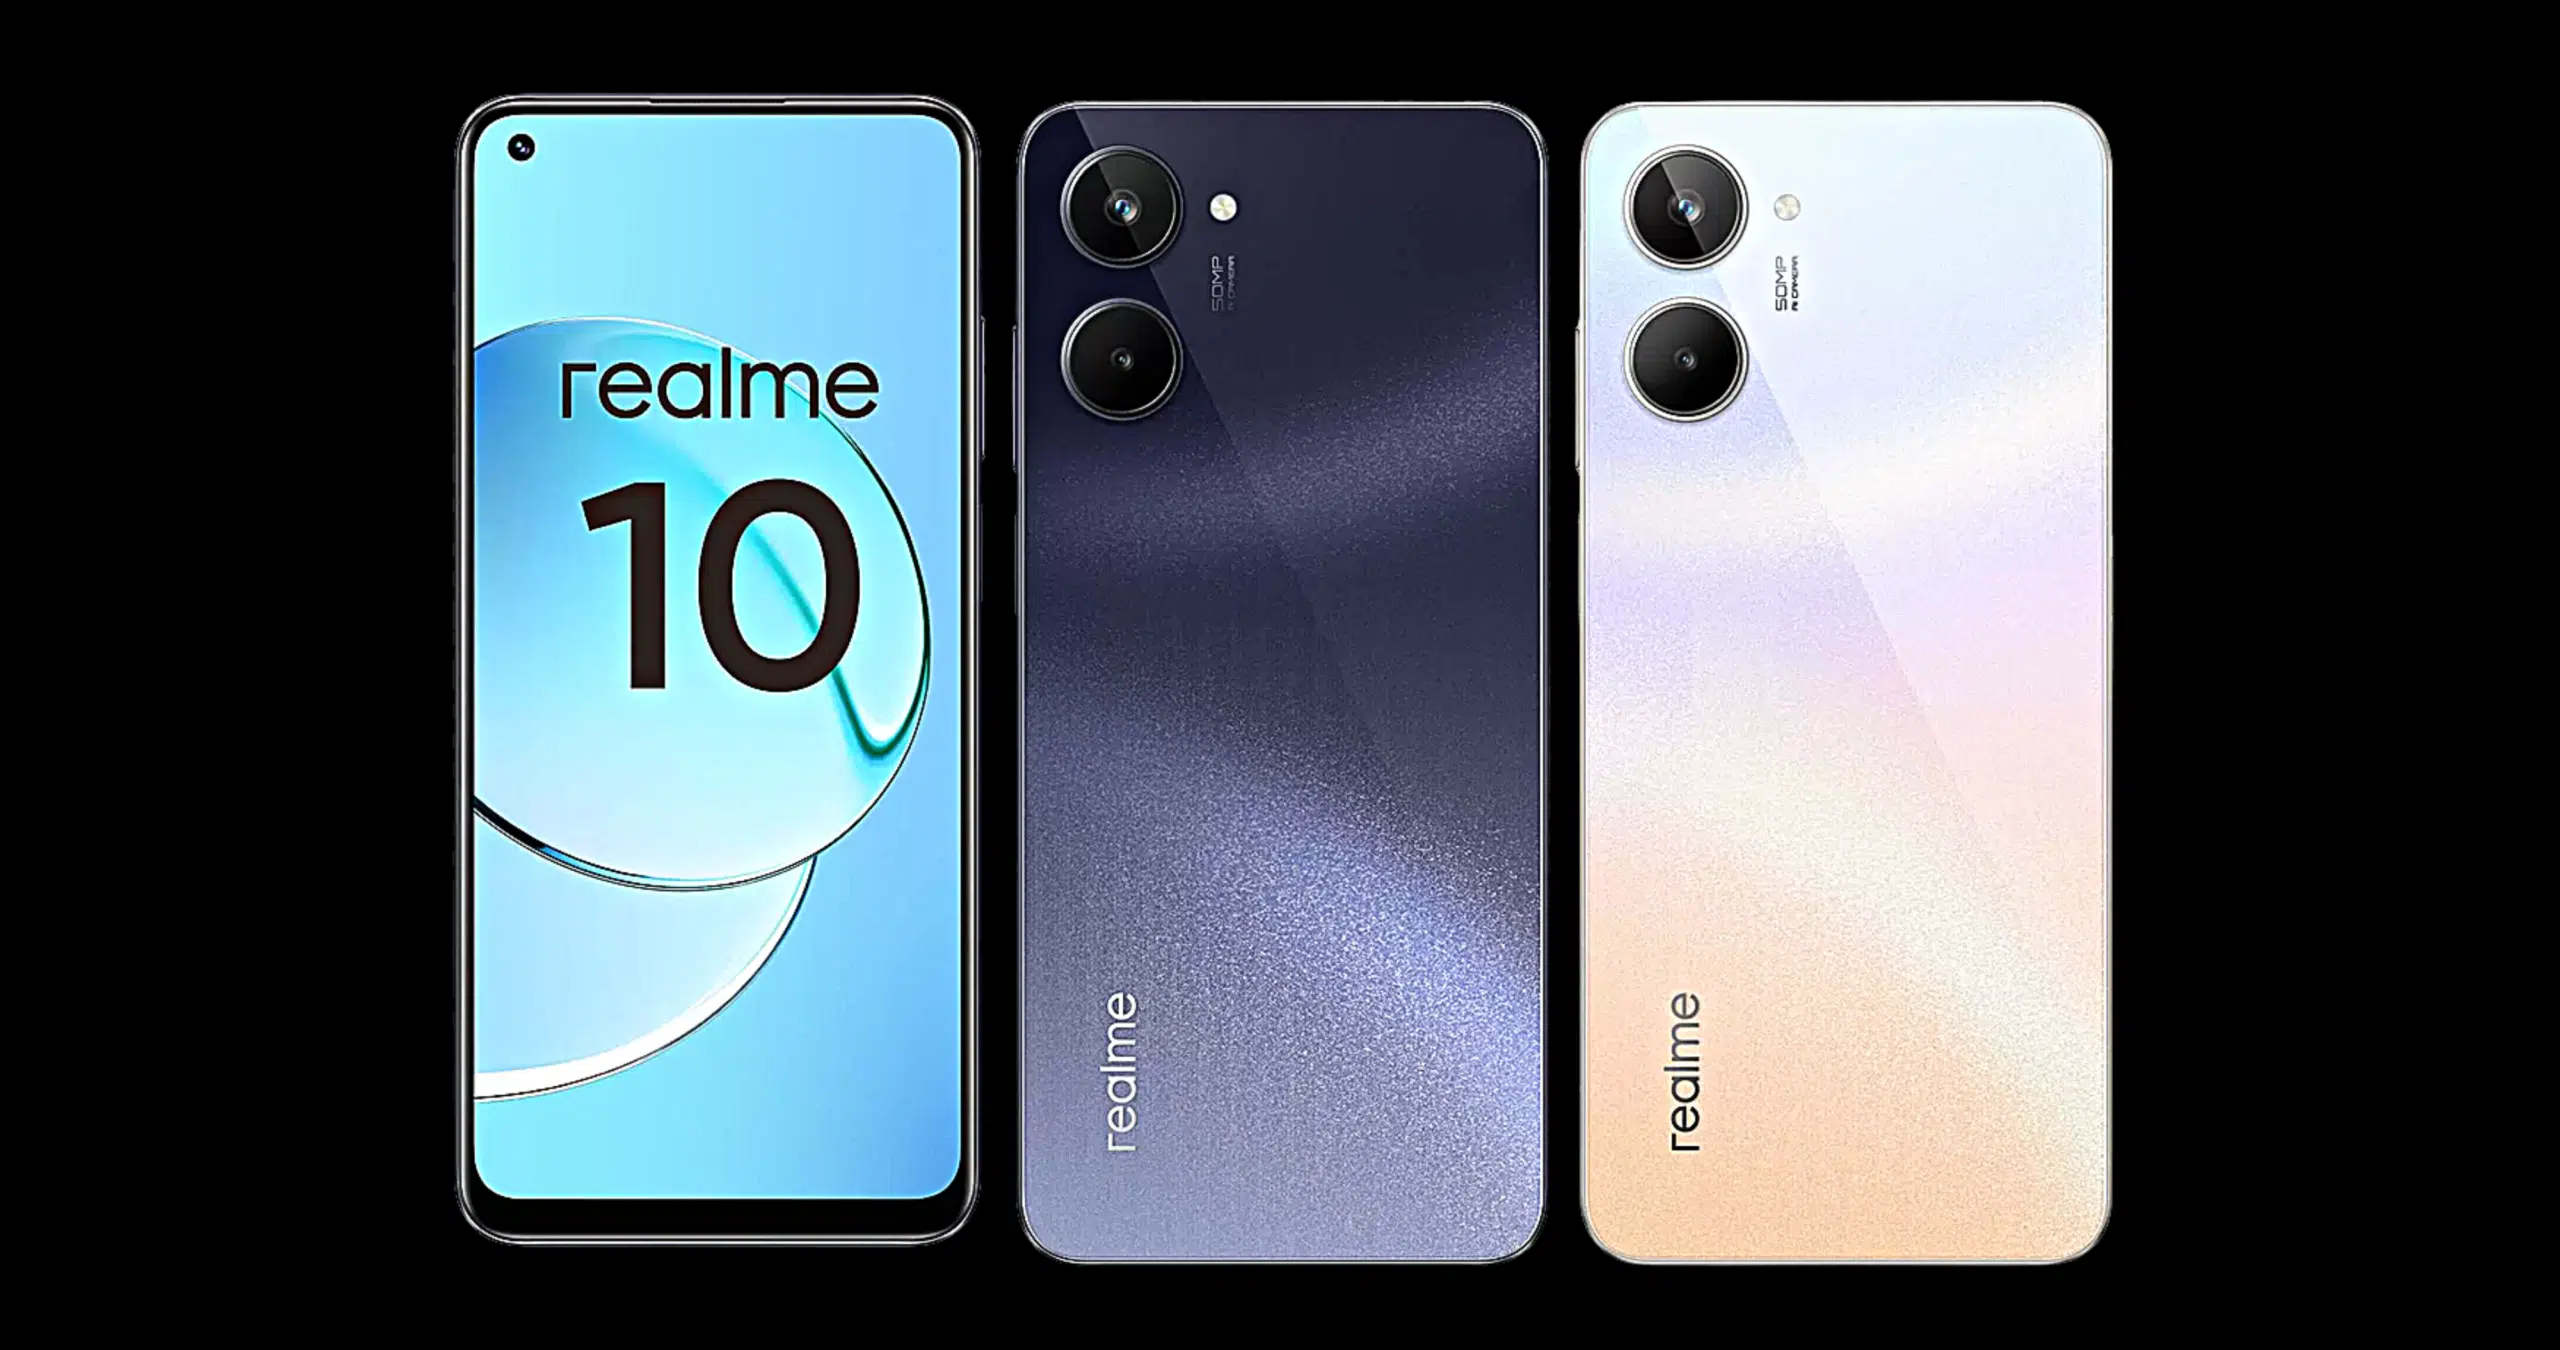 Realme 10 with Mediatek Helio G99 SoC, 90Hz AMOLED display is launched in India